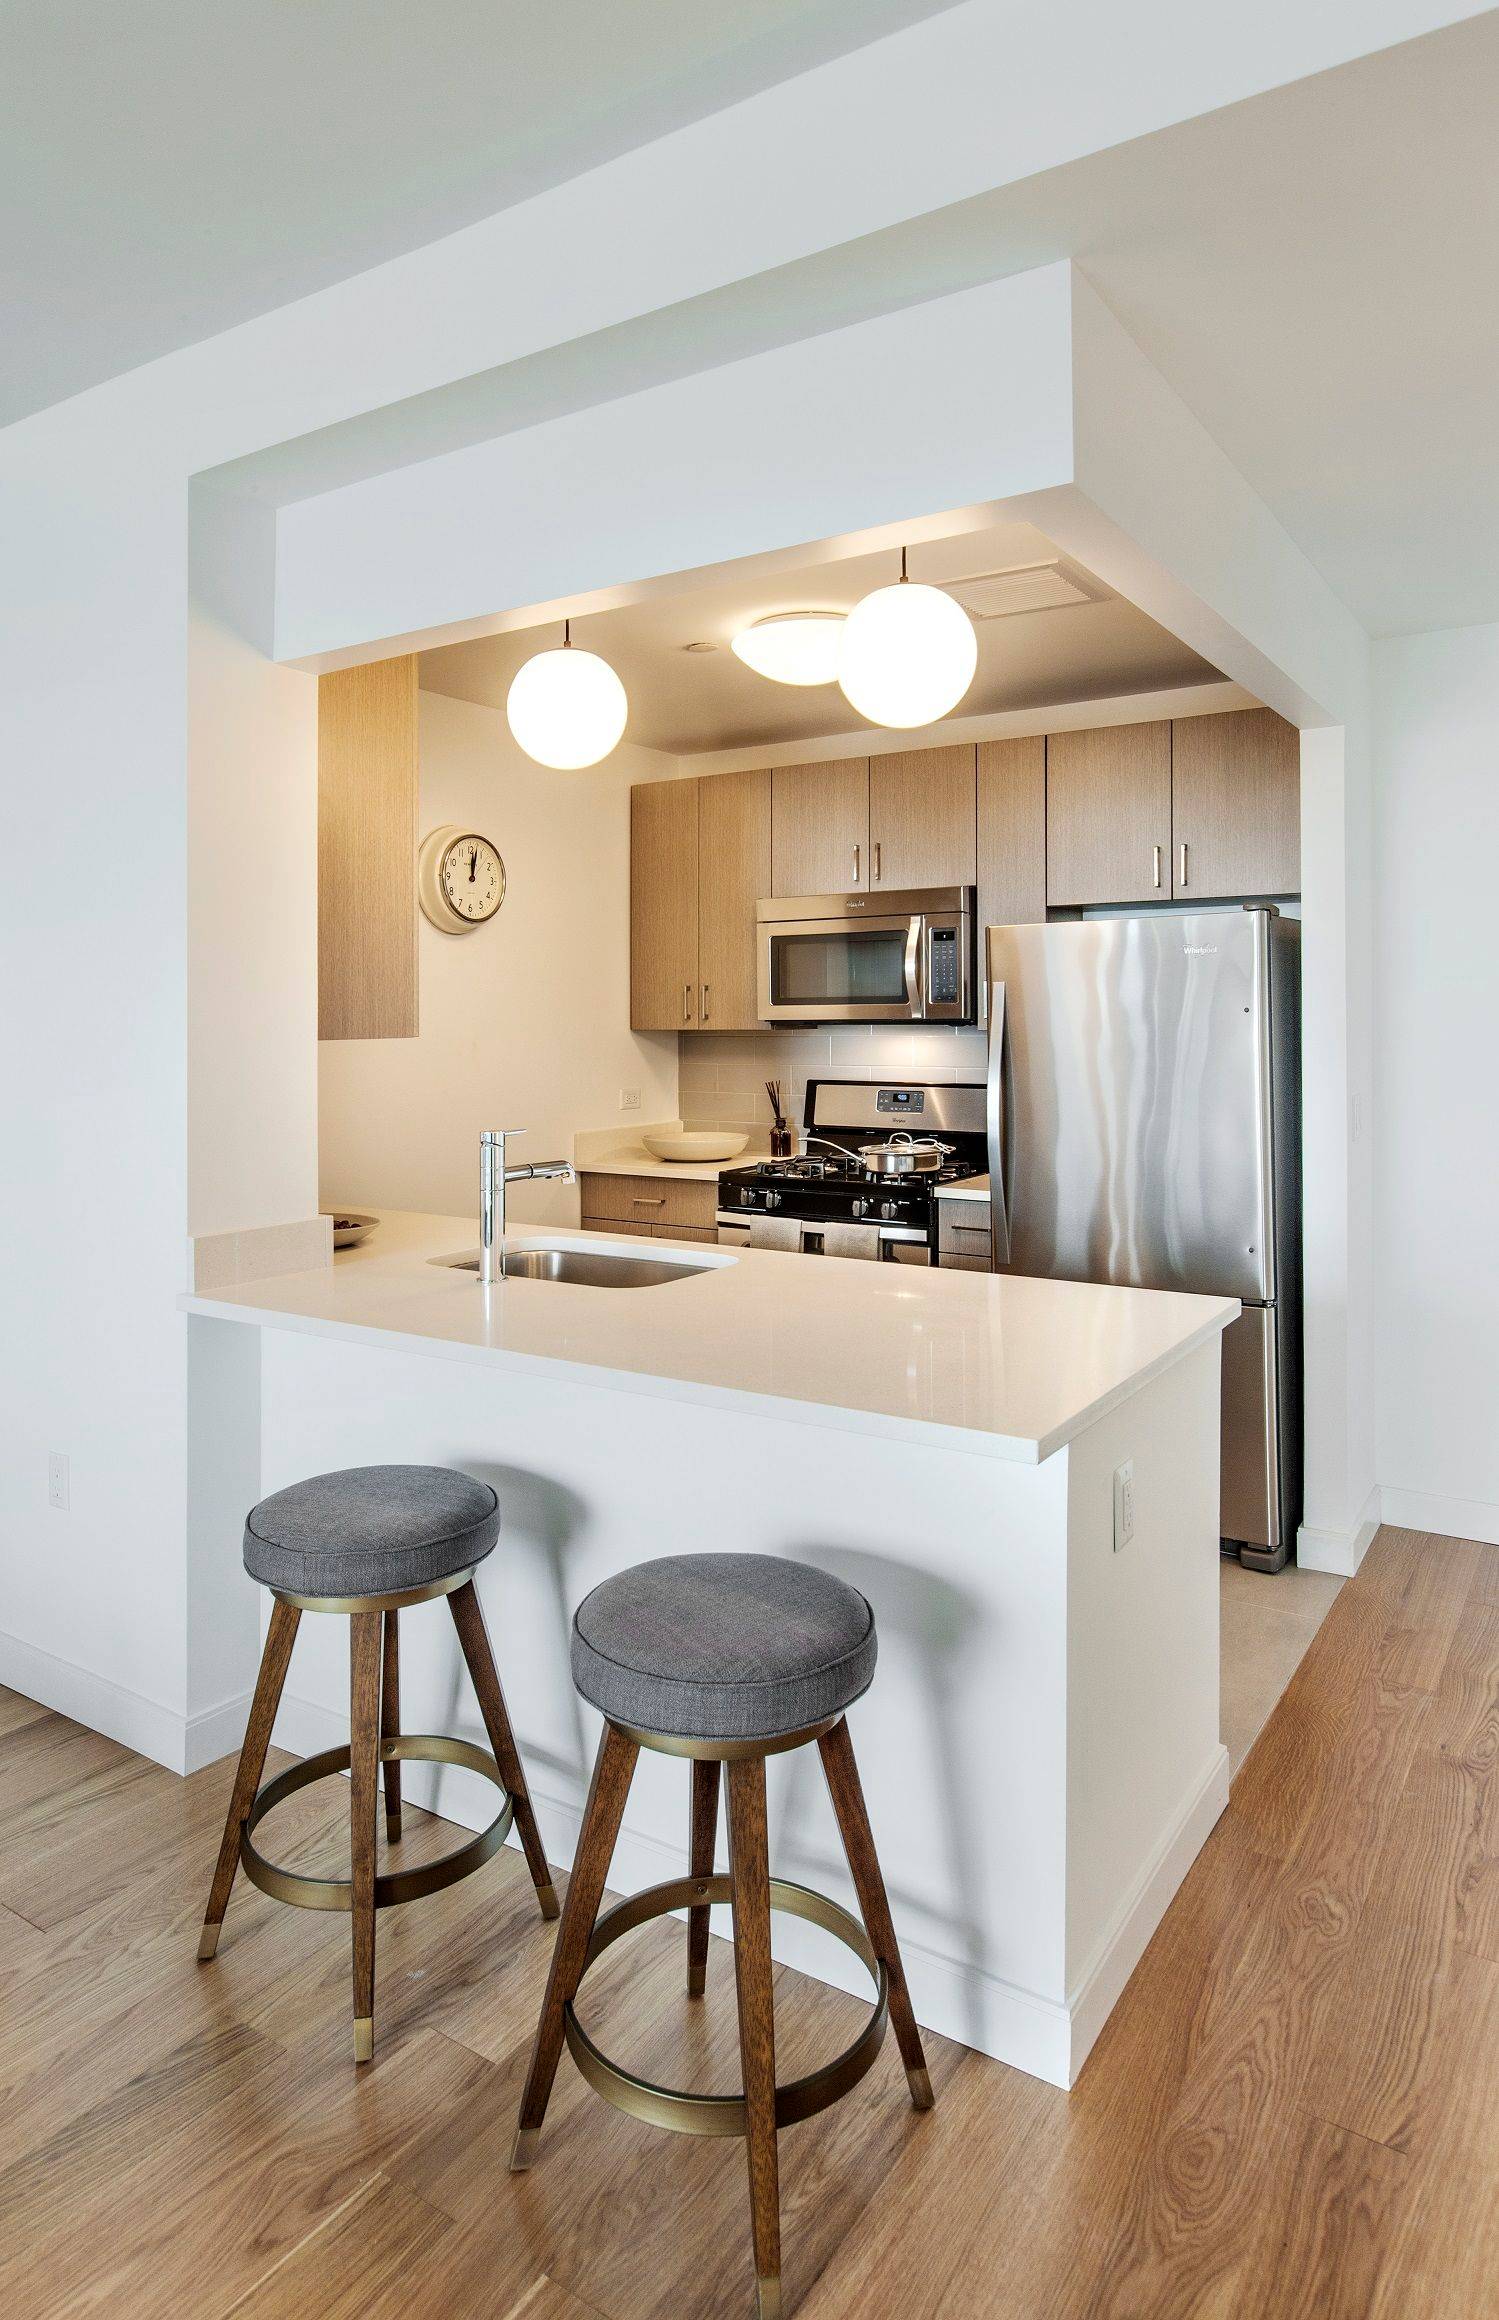 West facing 2 bedroom with over sized windows featuring Manhattan skyline views, an open kitchen featuring stainless steel appliances, Caesarstone quartz counters and an eating bar, and an in unit ...